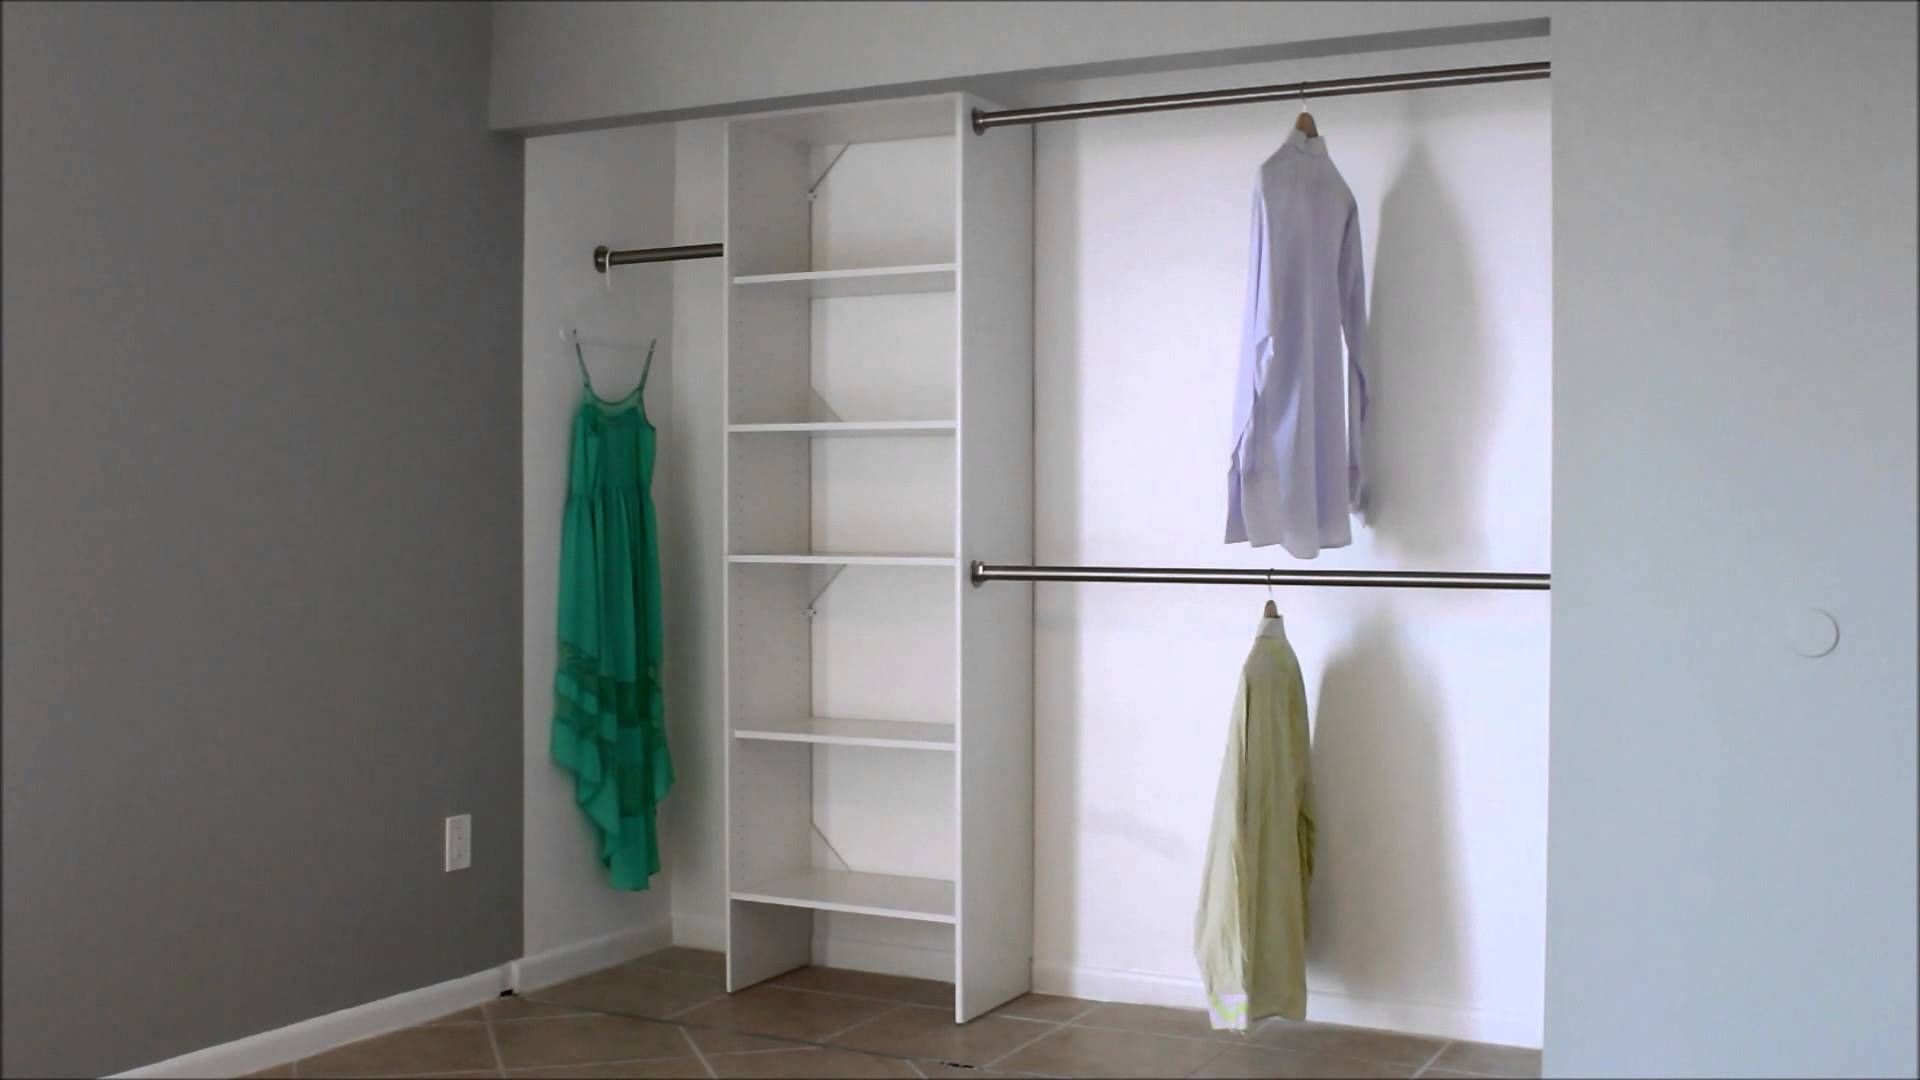 Double Rod Closet Height | Standard Closet Rod Height | Closet Rod Height,  Closet Rod, Double Closet With Regard To Tall Double Hanging Rail Wardrobes (View 6 of 15)